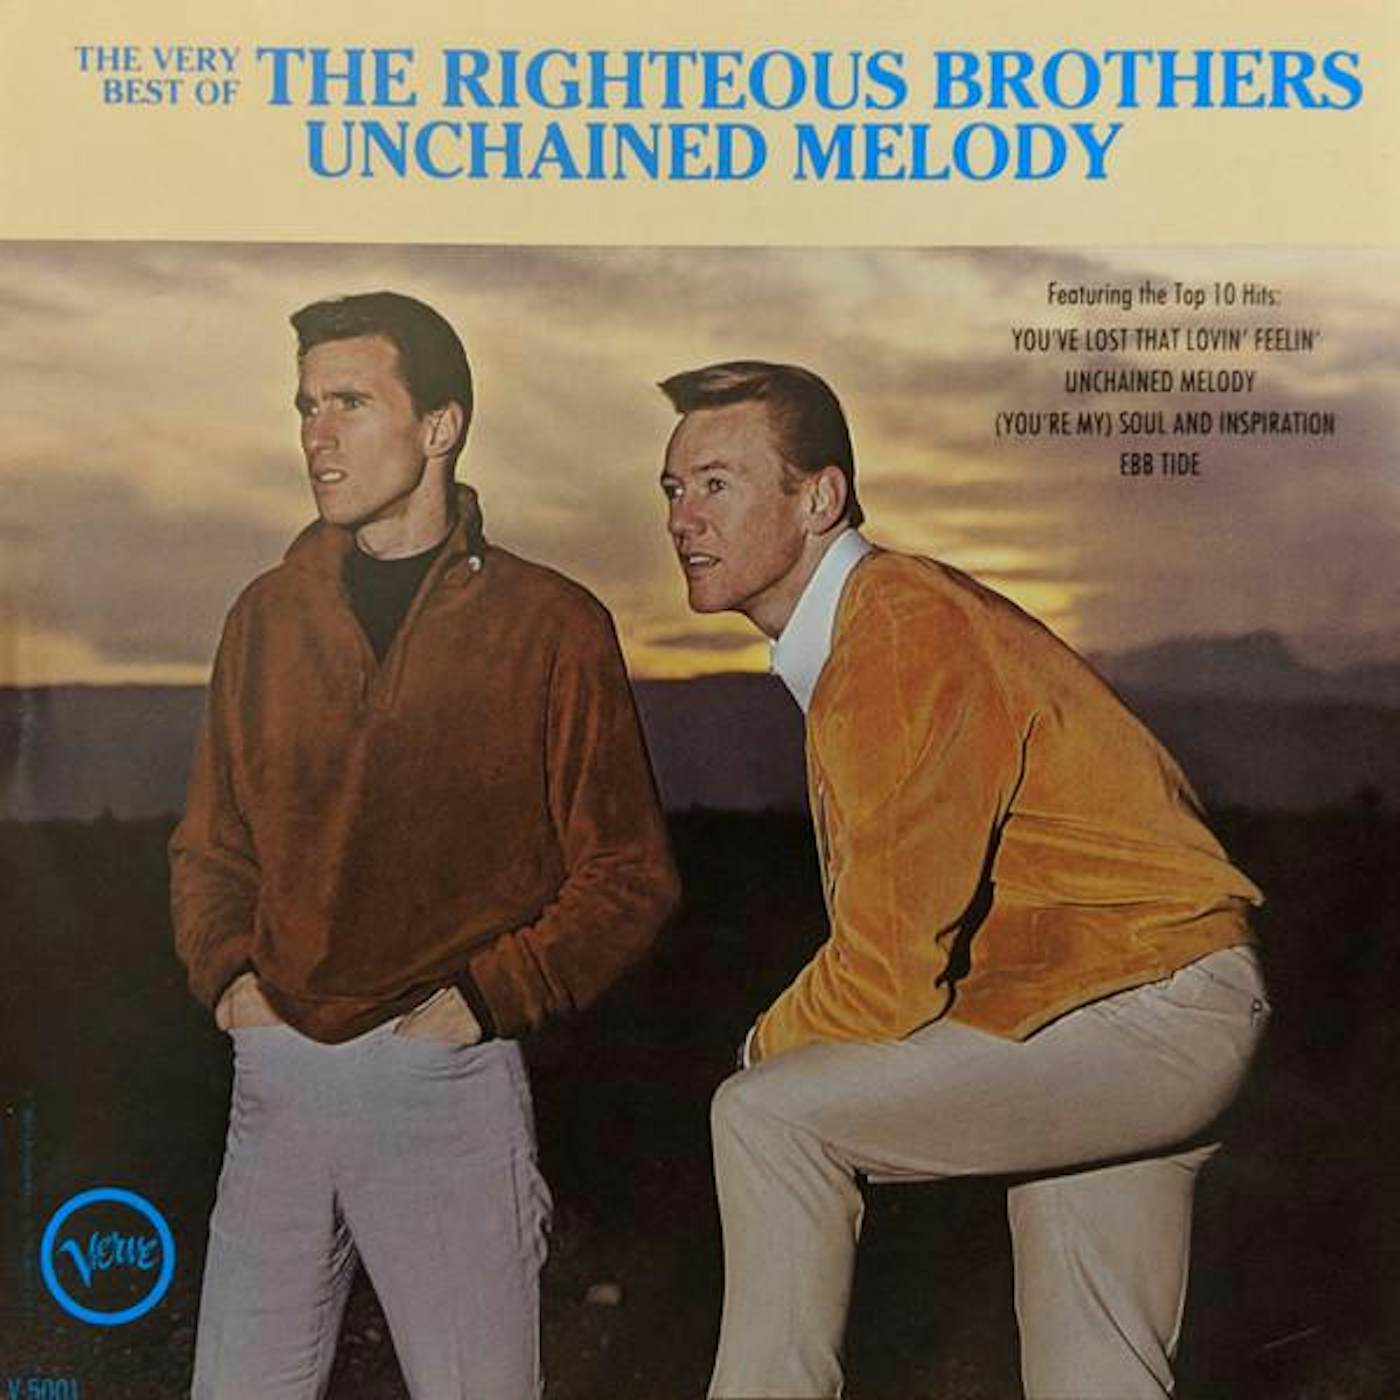 The Righteous Brothers VERY BEST OF: UNCHAINED MELODY CD